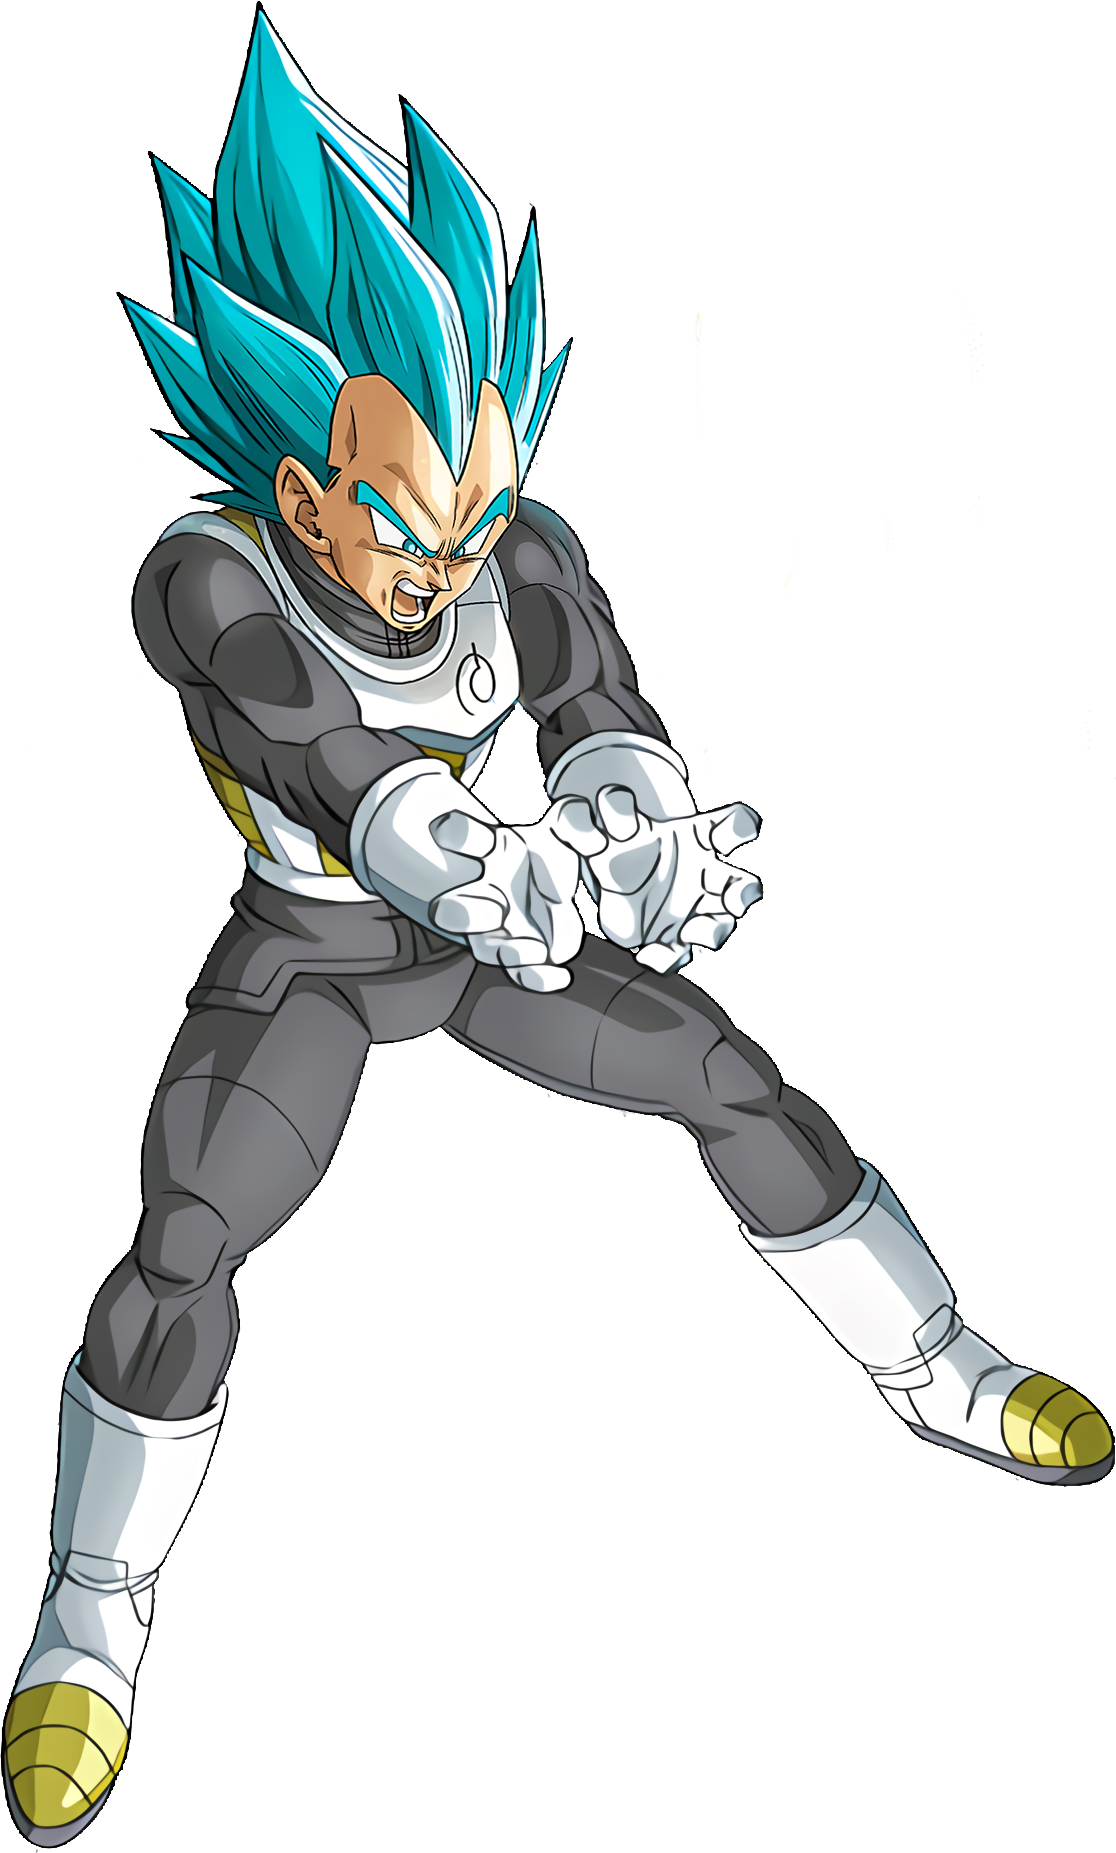 Vegeta Blue Whis Armor (Upscale) by woodlandbuckle on DeviantArt